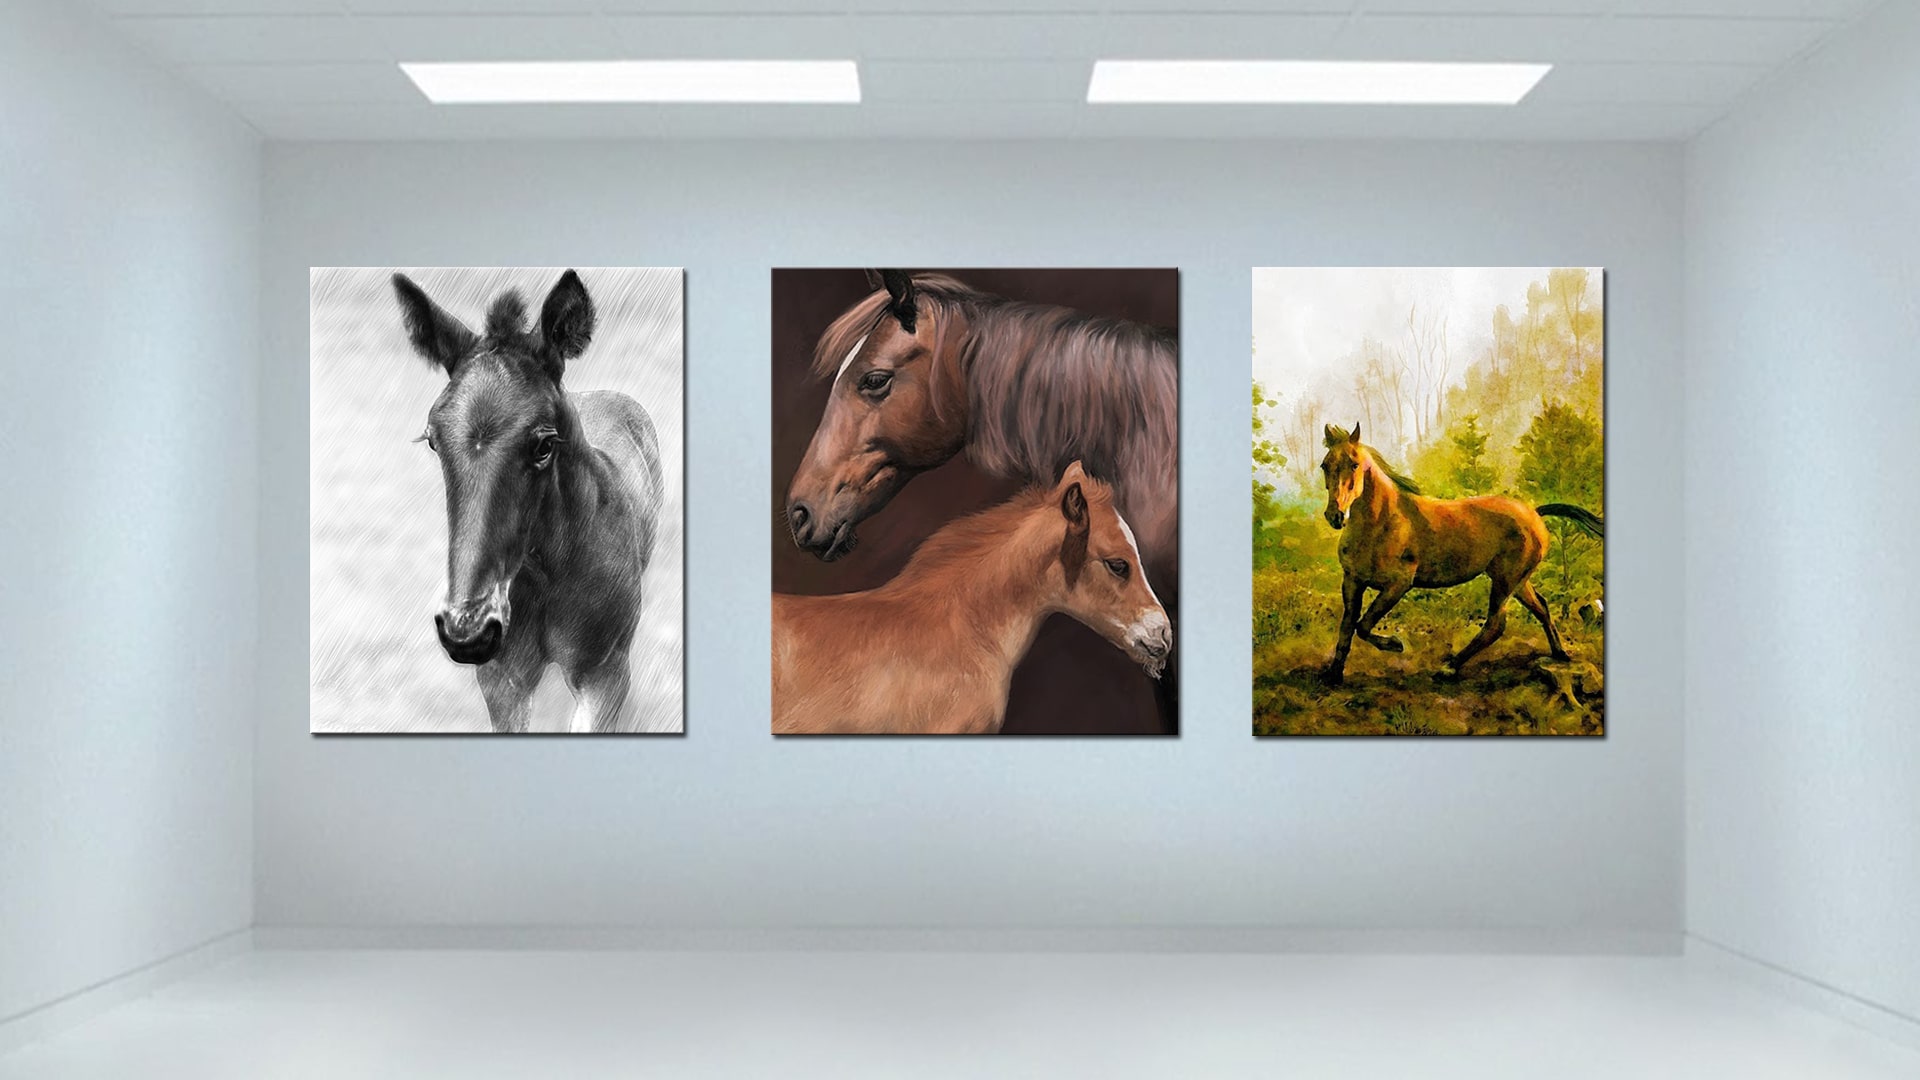 Portraits of horses made from pictures and displayed on wall in different artistic styles like oil and sketch.